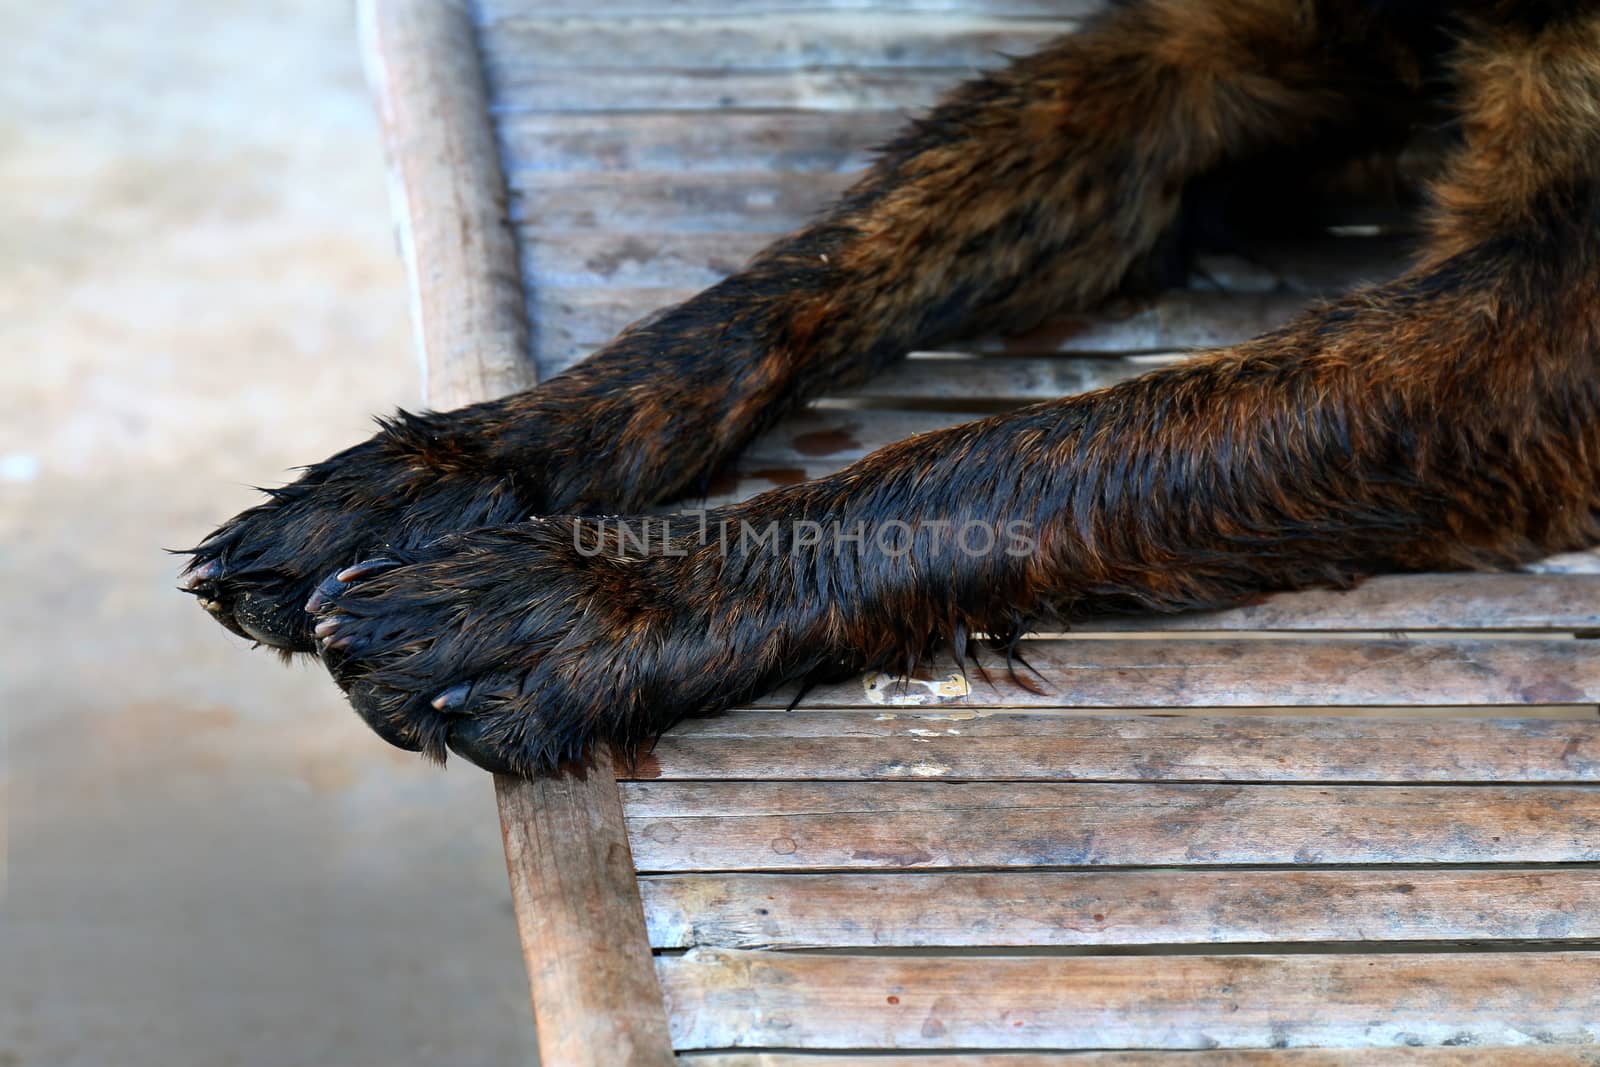 Wet dog legs, Wet dog hairs by cgdeaw